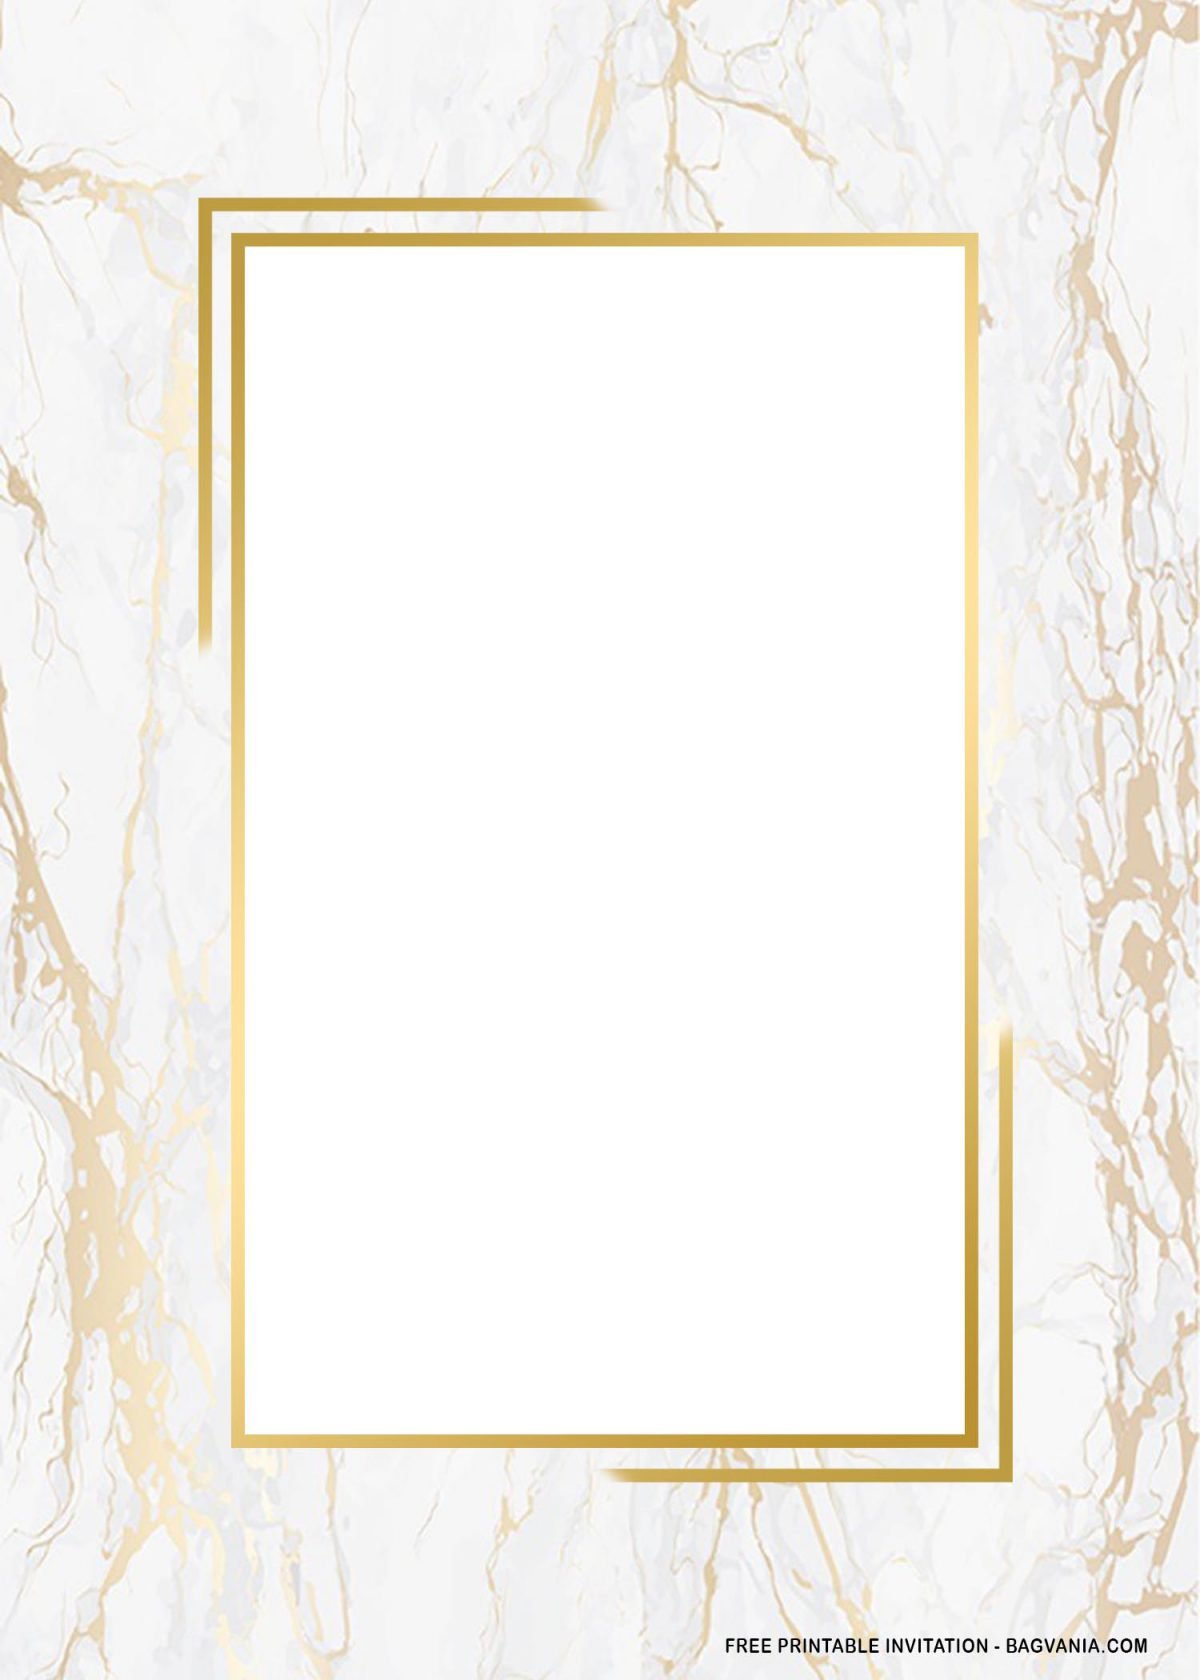 Free Printable Rectangle Gold Marble Baby Shower Invitation Templates With Gold Rectangle Frame